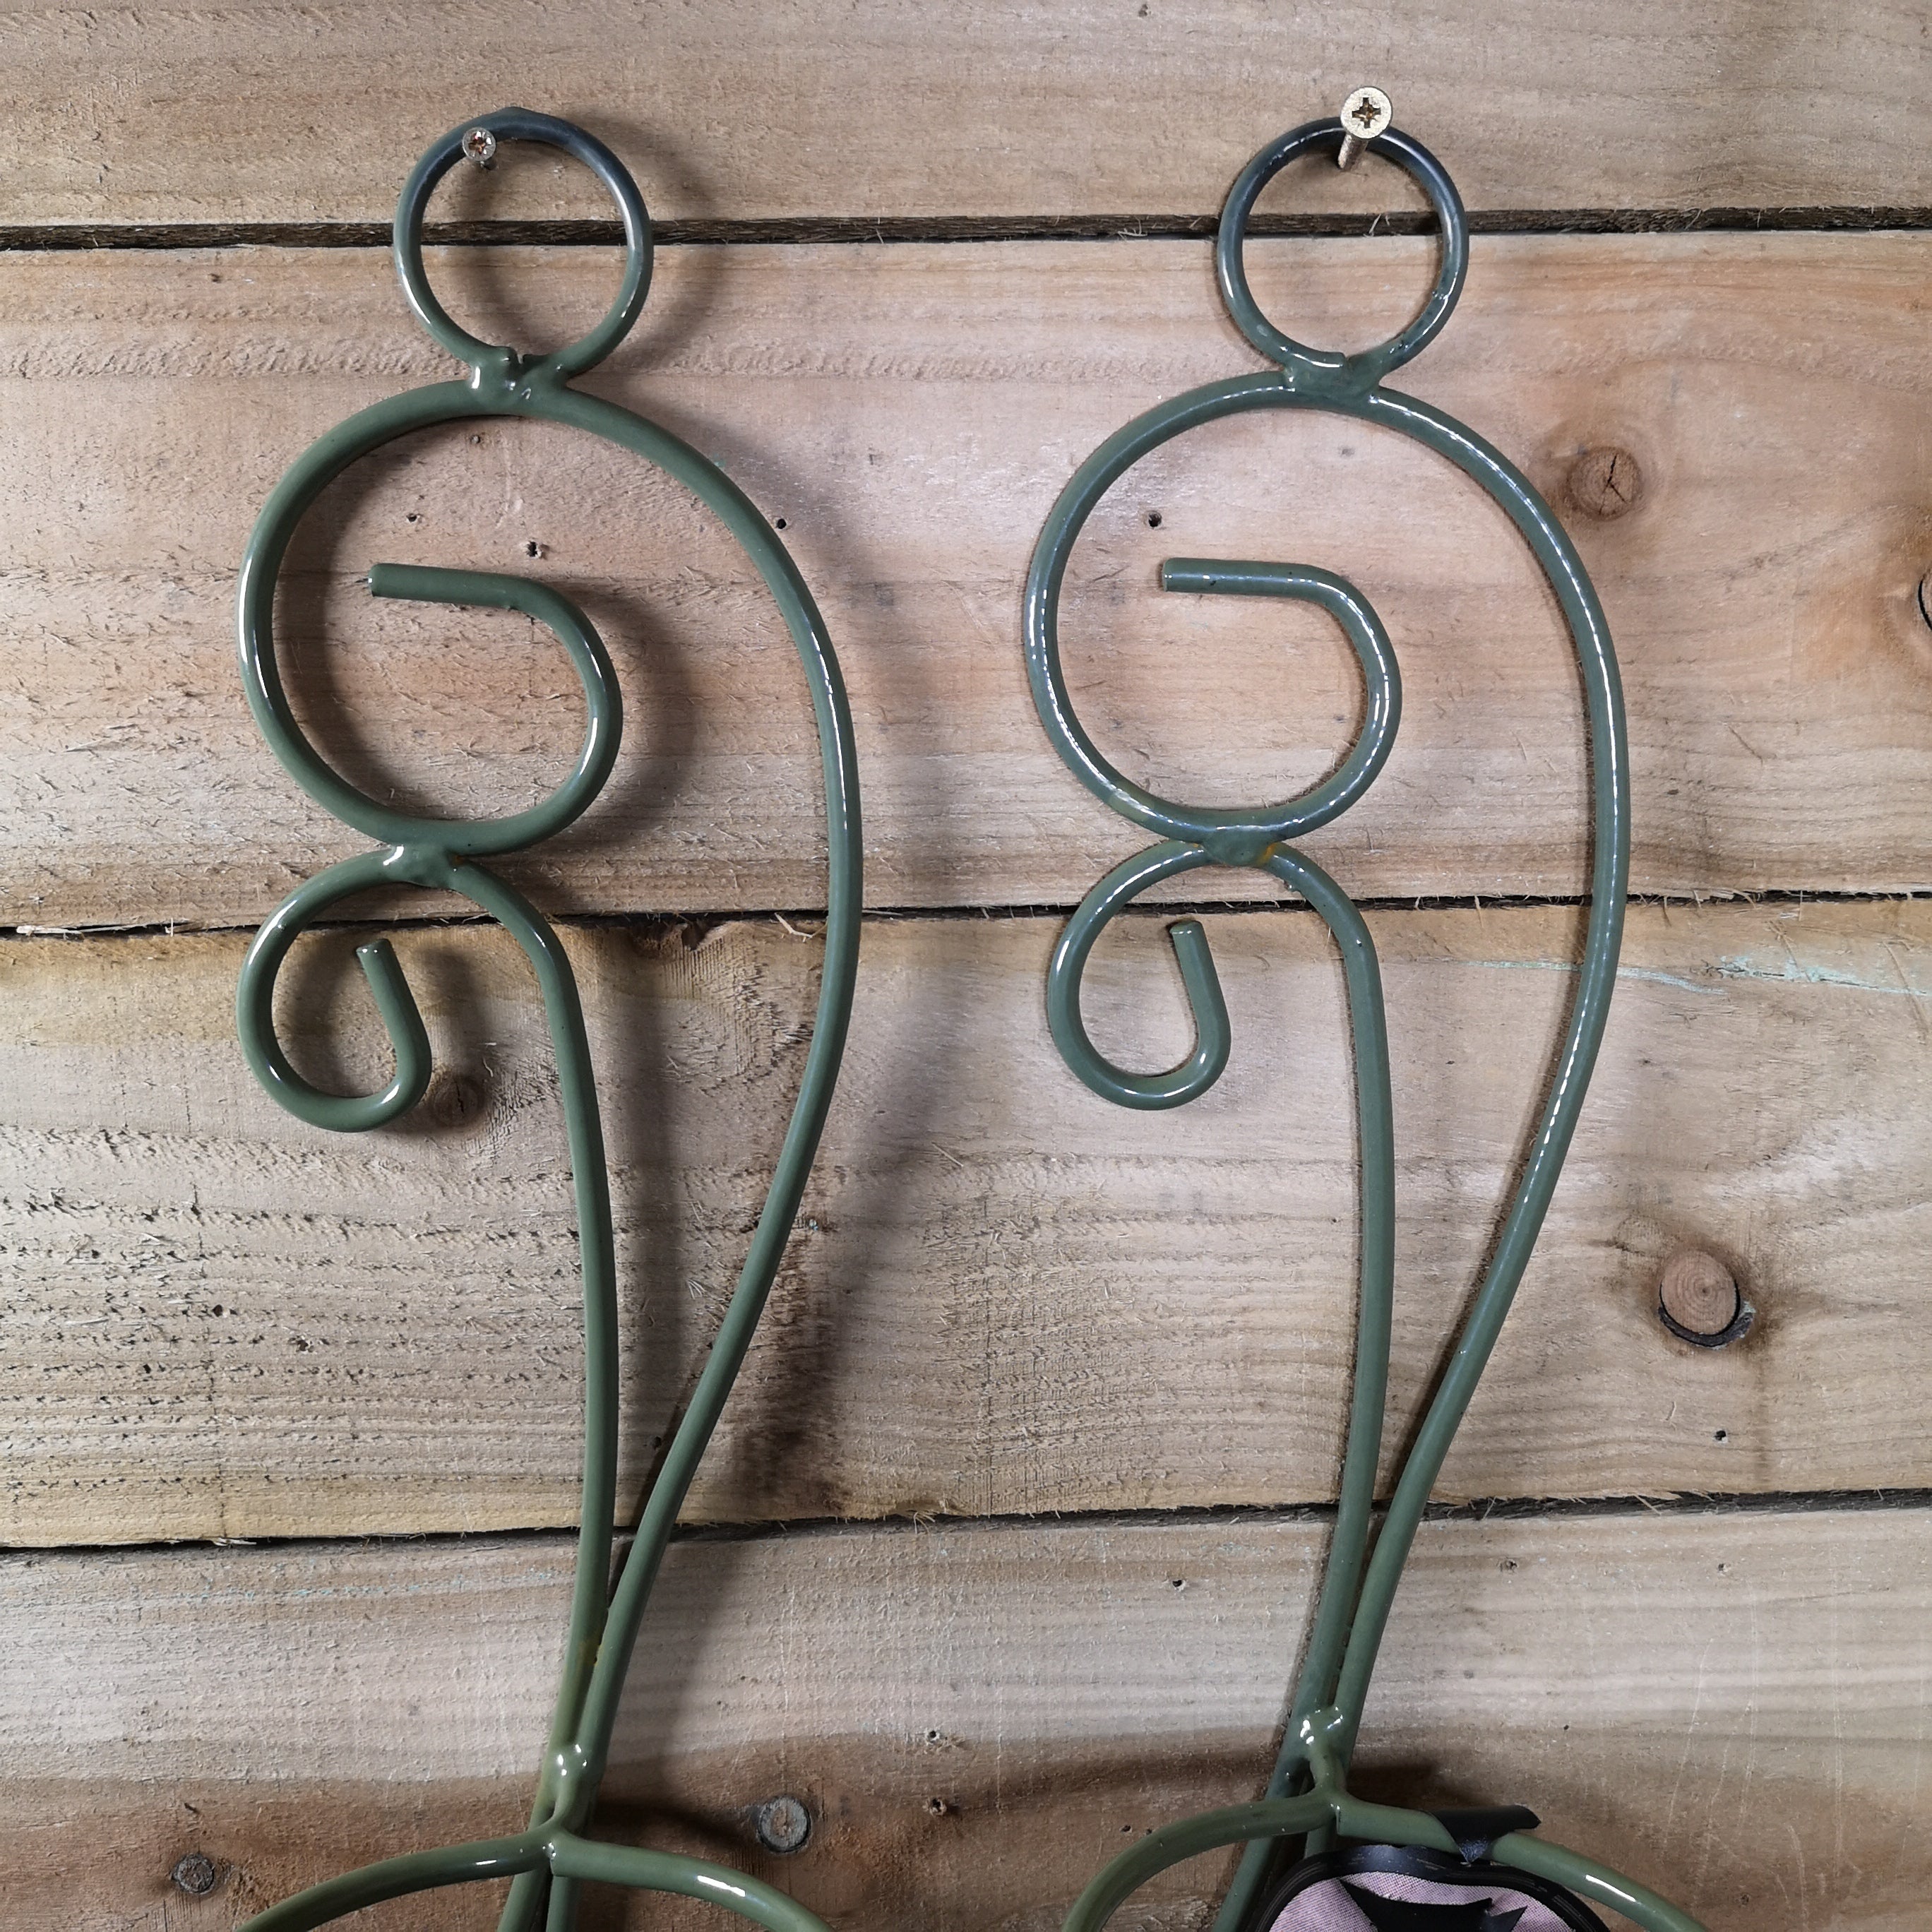 Pack of 2 Tom Chambers Handcrafted Verona Sage Green Patio Metal Garden Herb Plant Flower Pot Wall Mount Holder